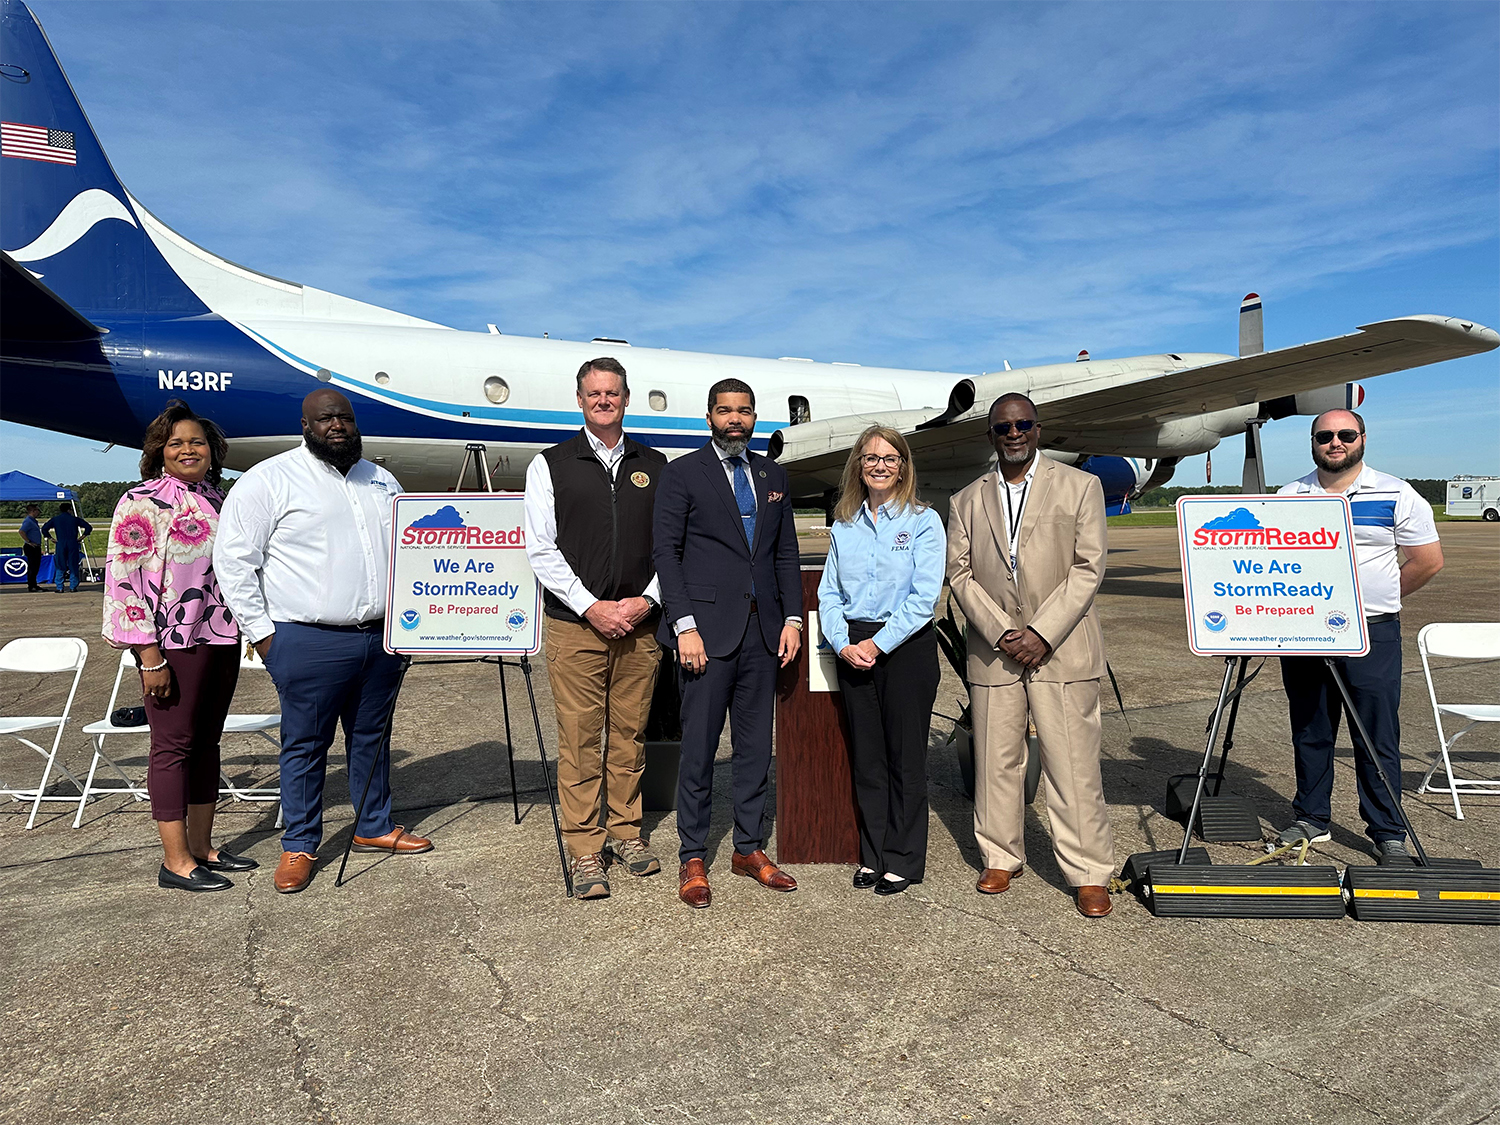 The Jackson-Medgar Wiley Evers International Airport (JAN) and Hawkins Field Airport (HKS) Designated as StormReady® by the National Weather Service